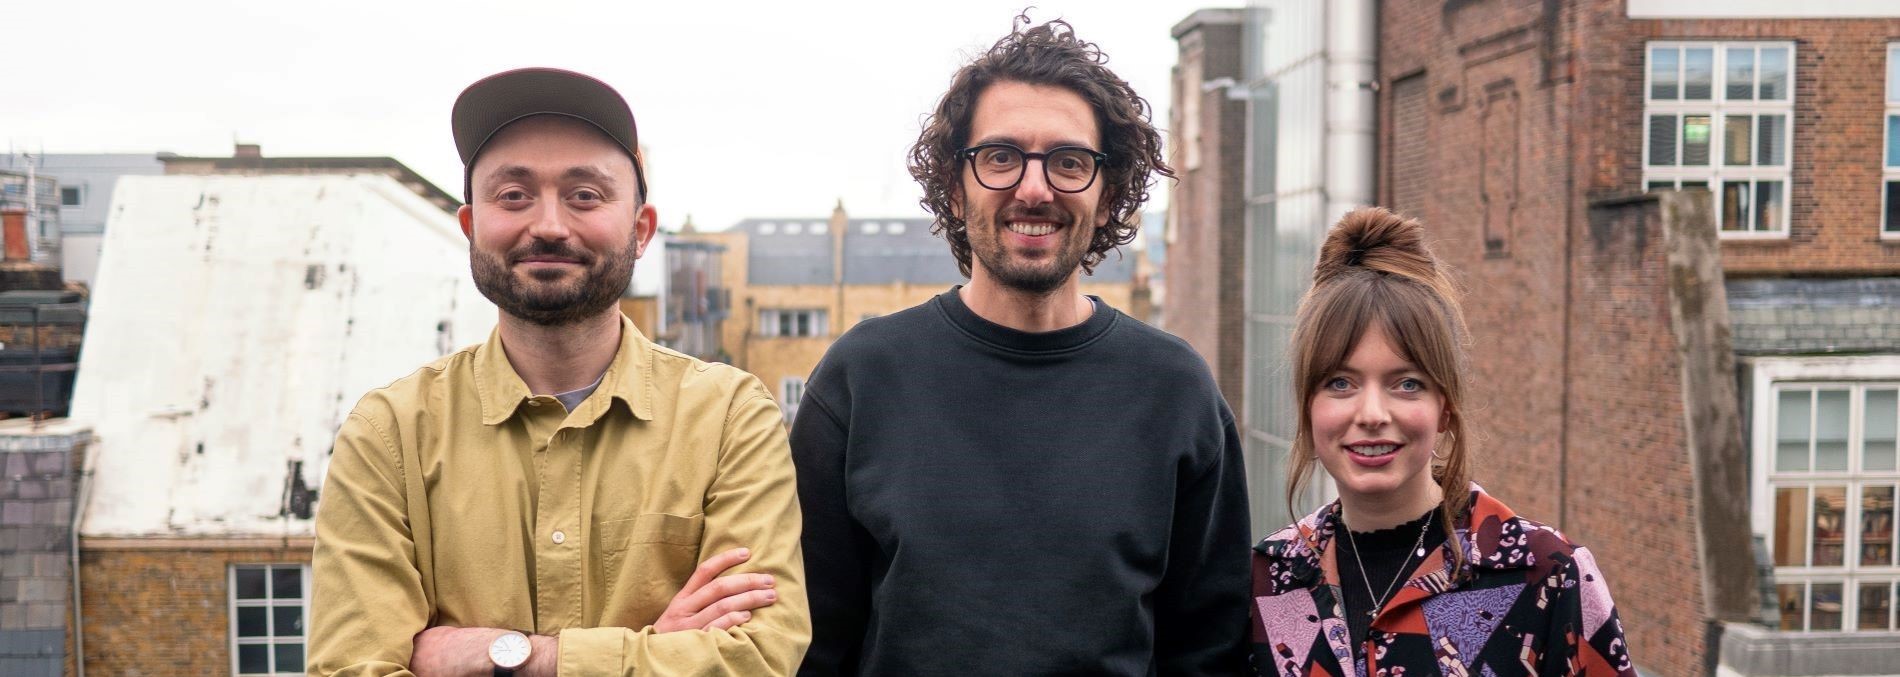 elvis hires senior creative talent from Grey and Ogilvy following record year for new business in 2022